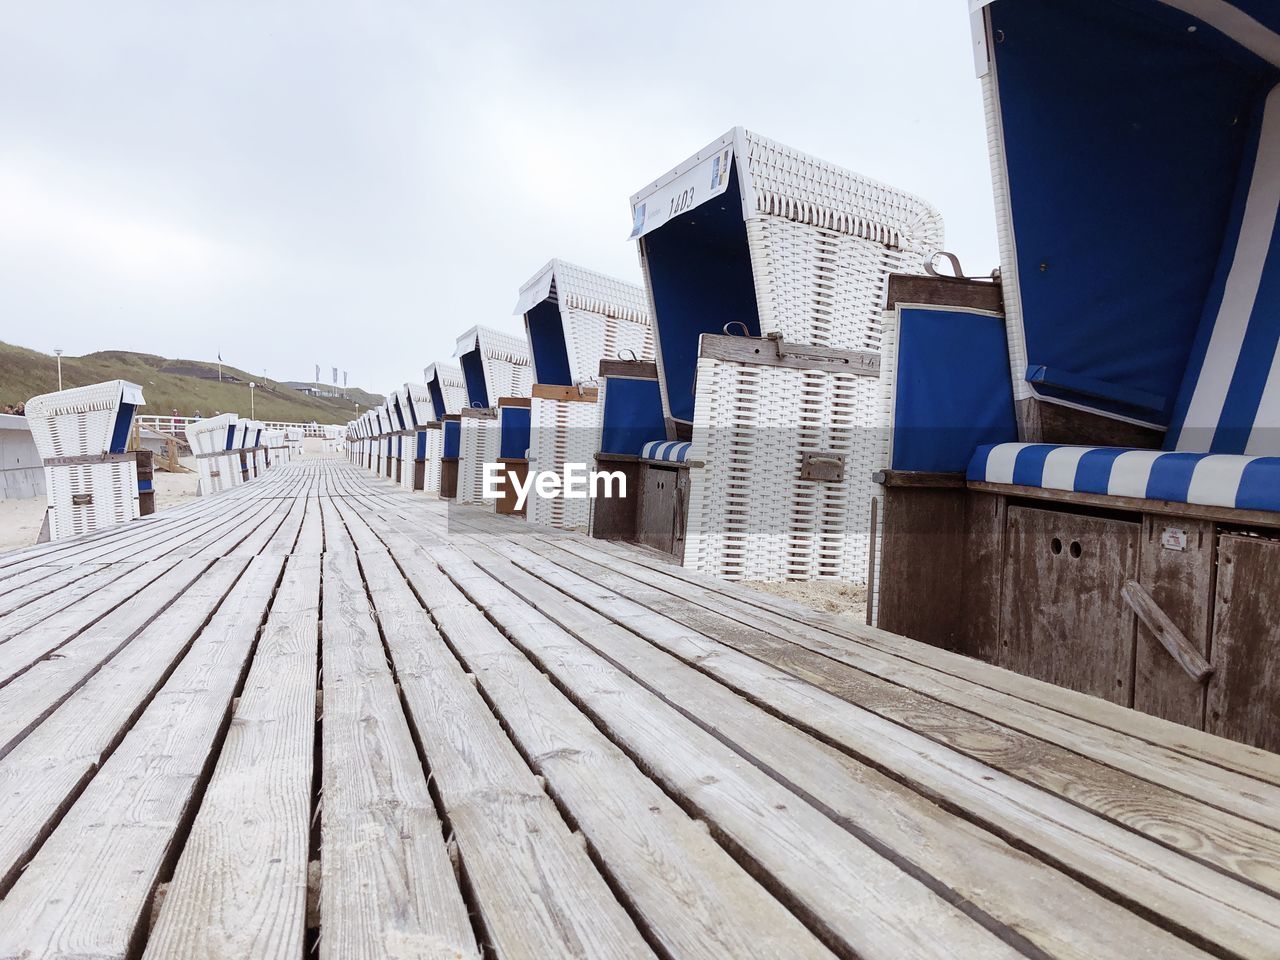 Footpath made of wooden planks on the beach through deck chairs against sky